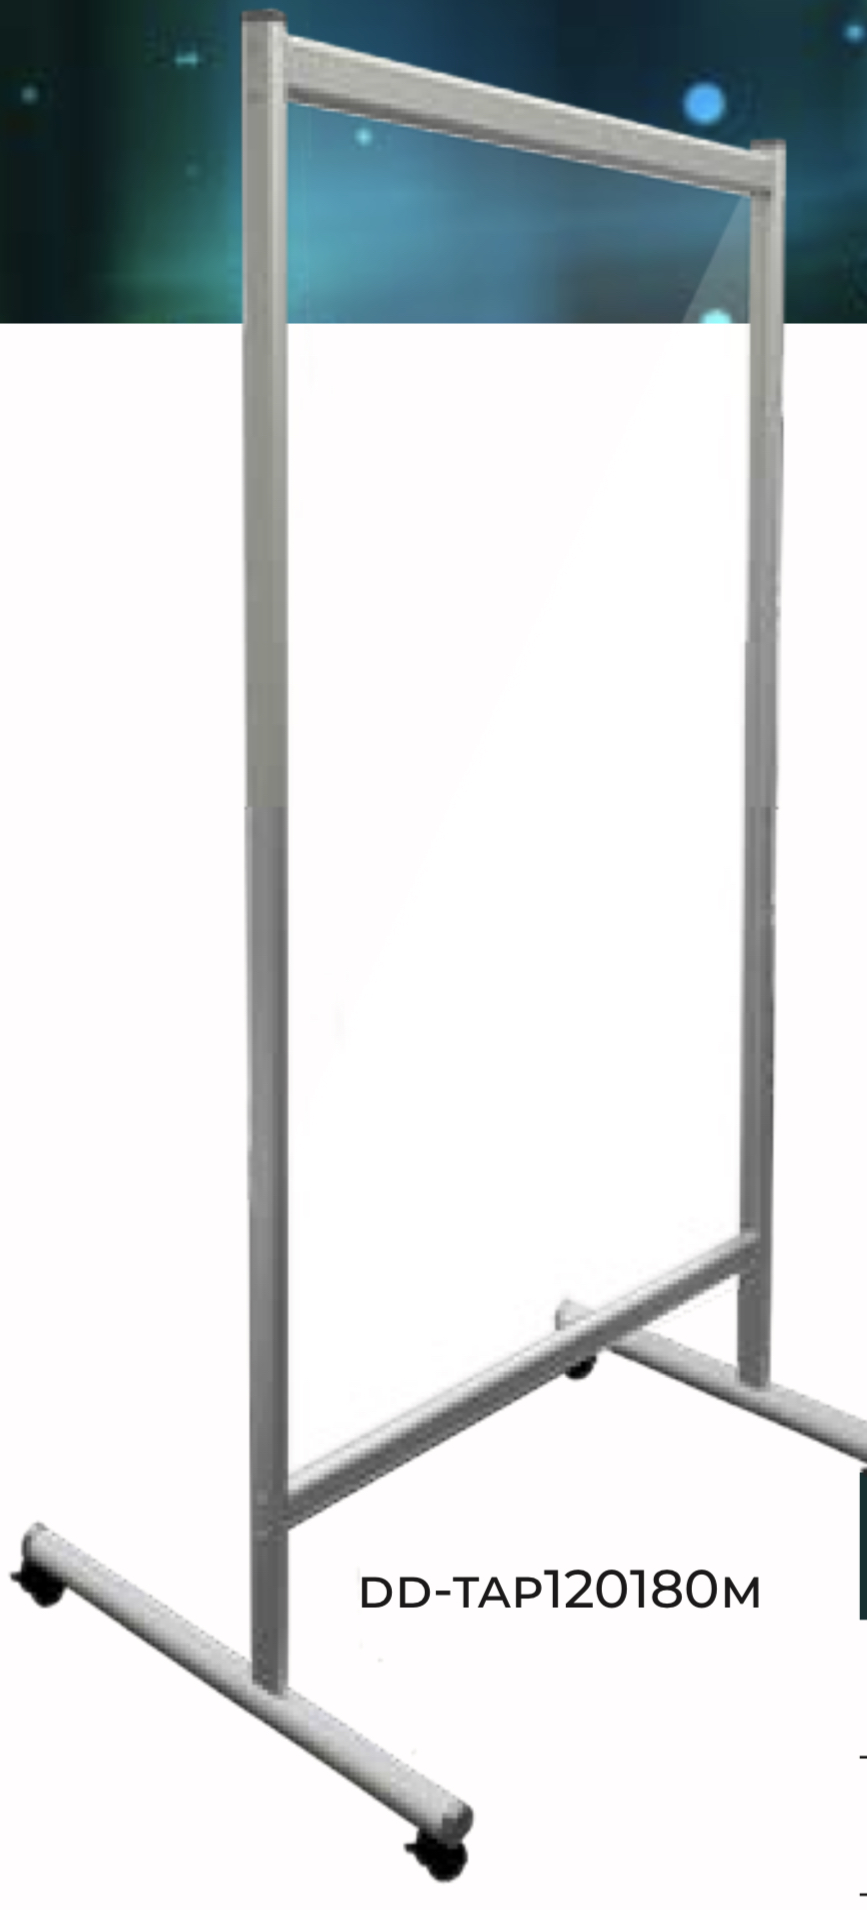 FLOORSTANDING PERSPEX SCREEN W 1230 x H 1780 x D 620 MOBILE PROTECTIVE PARTITION WALLS ACRYLIC GLASS  